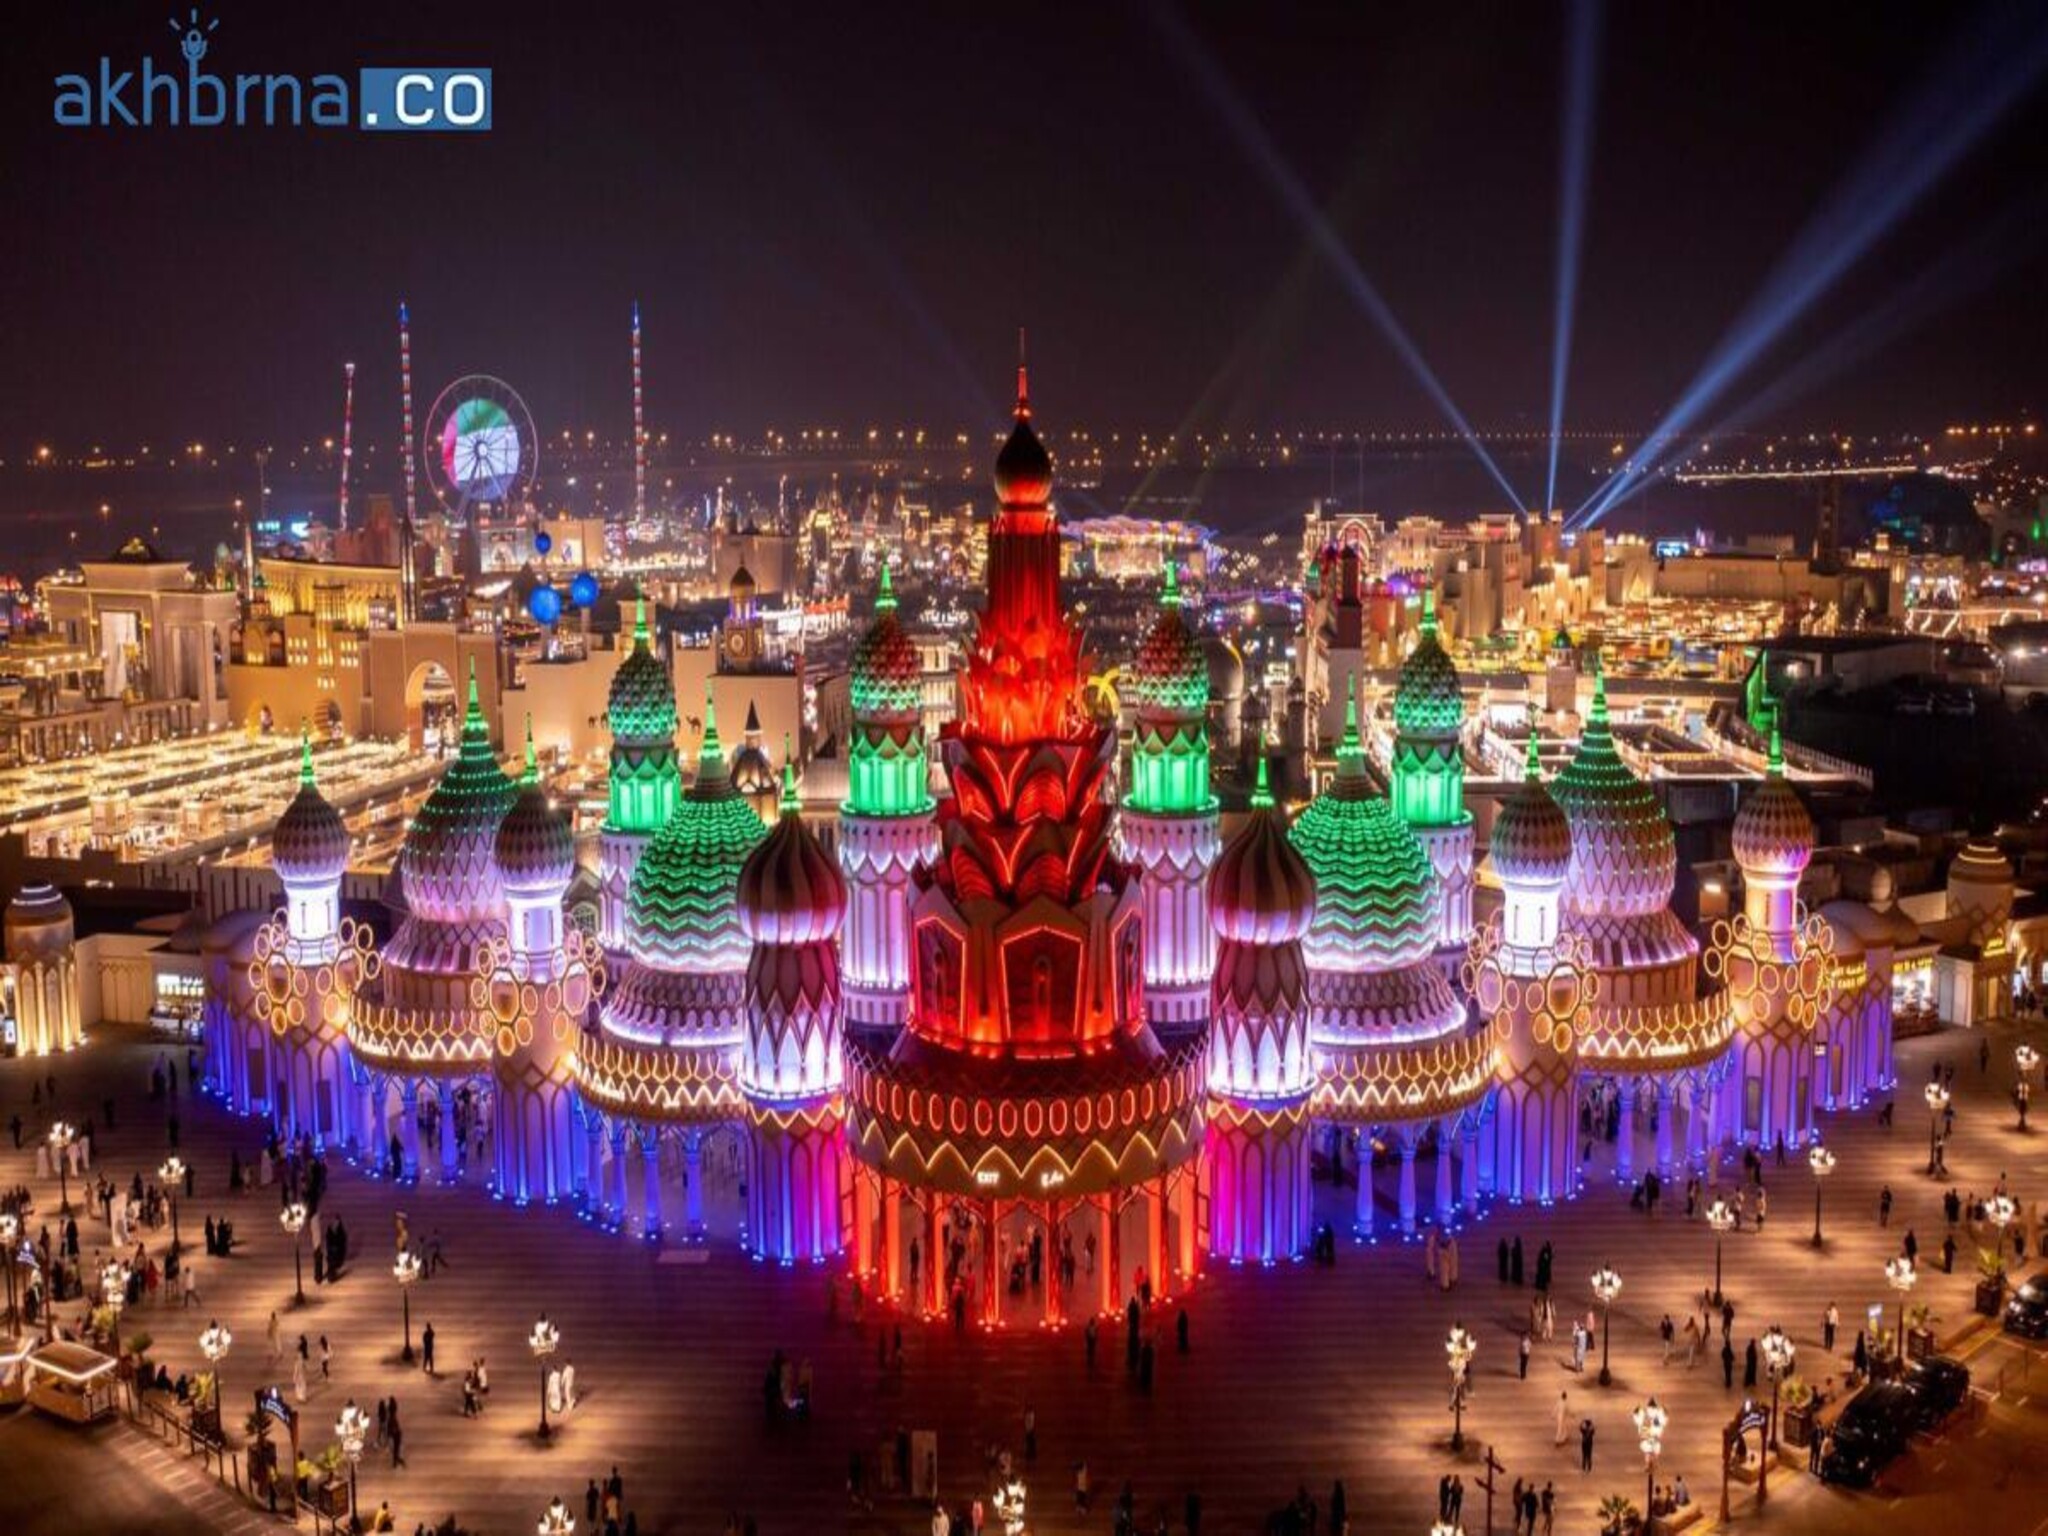 Dubai Global Village extends its closure for the 2nd day due to bad weather